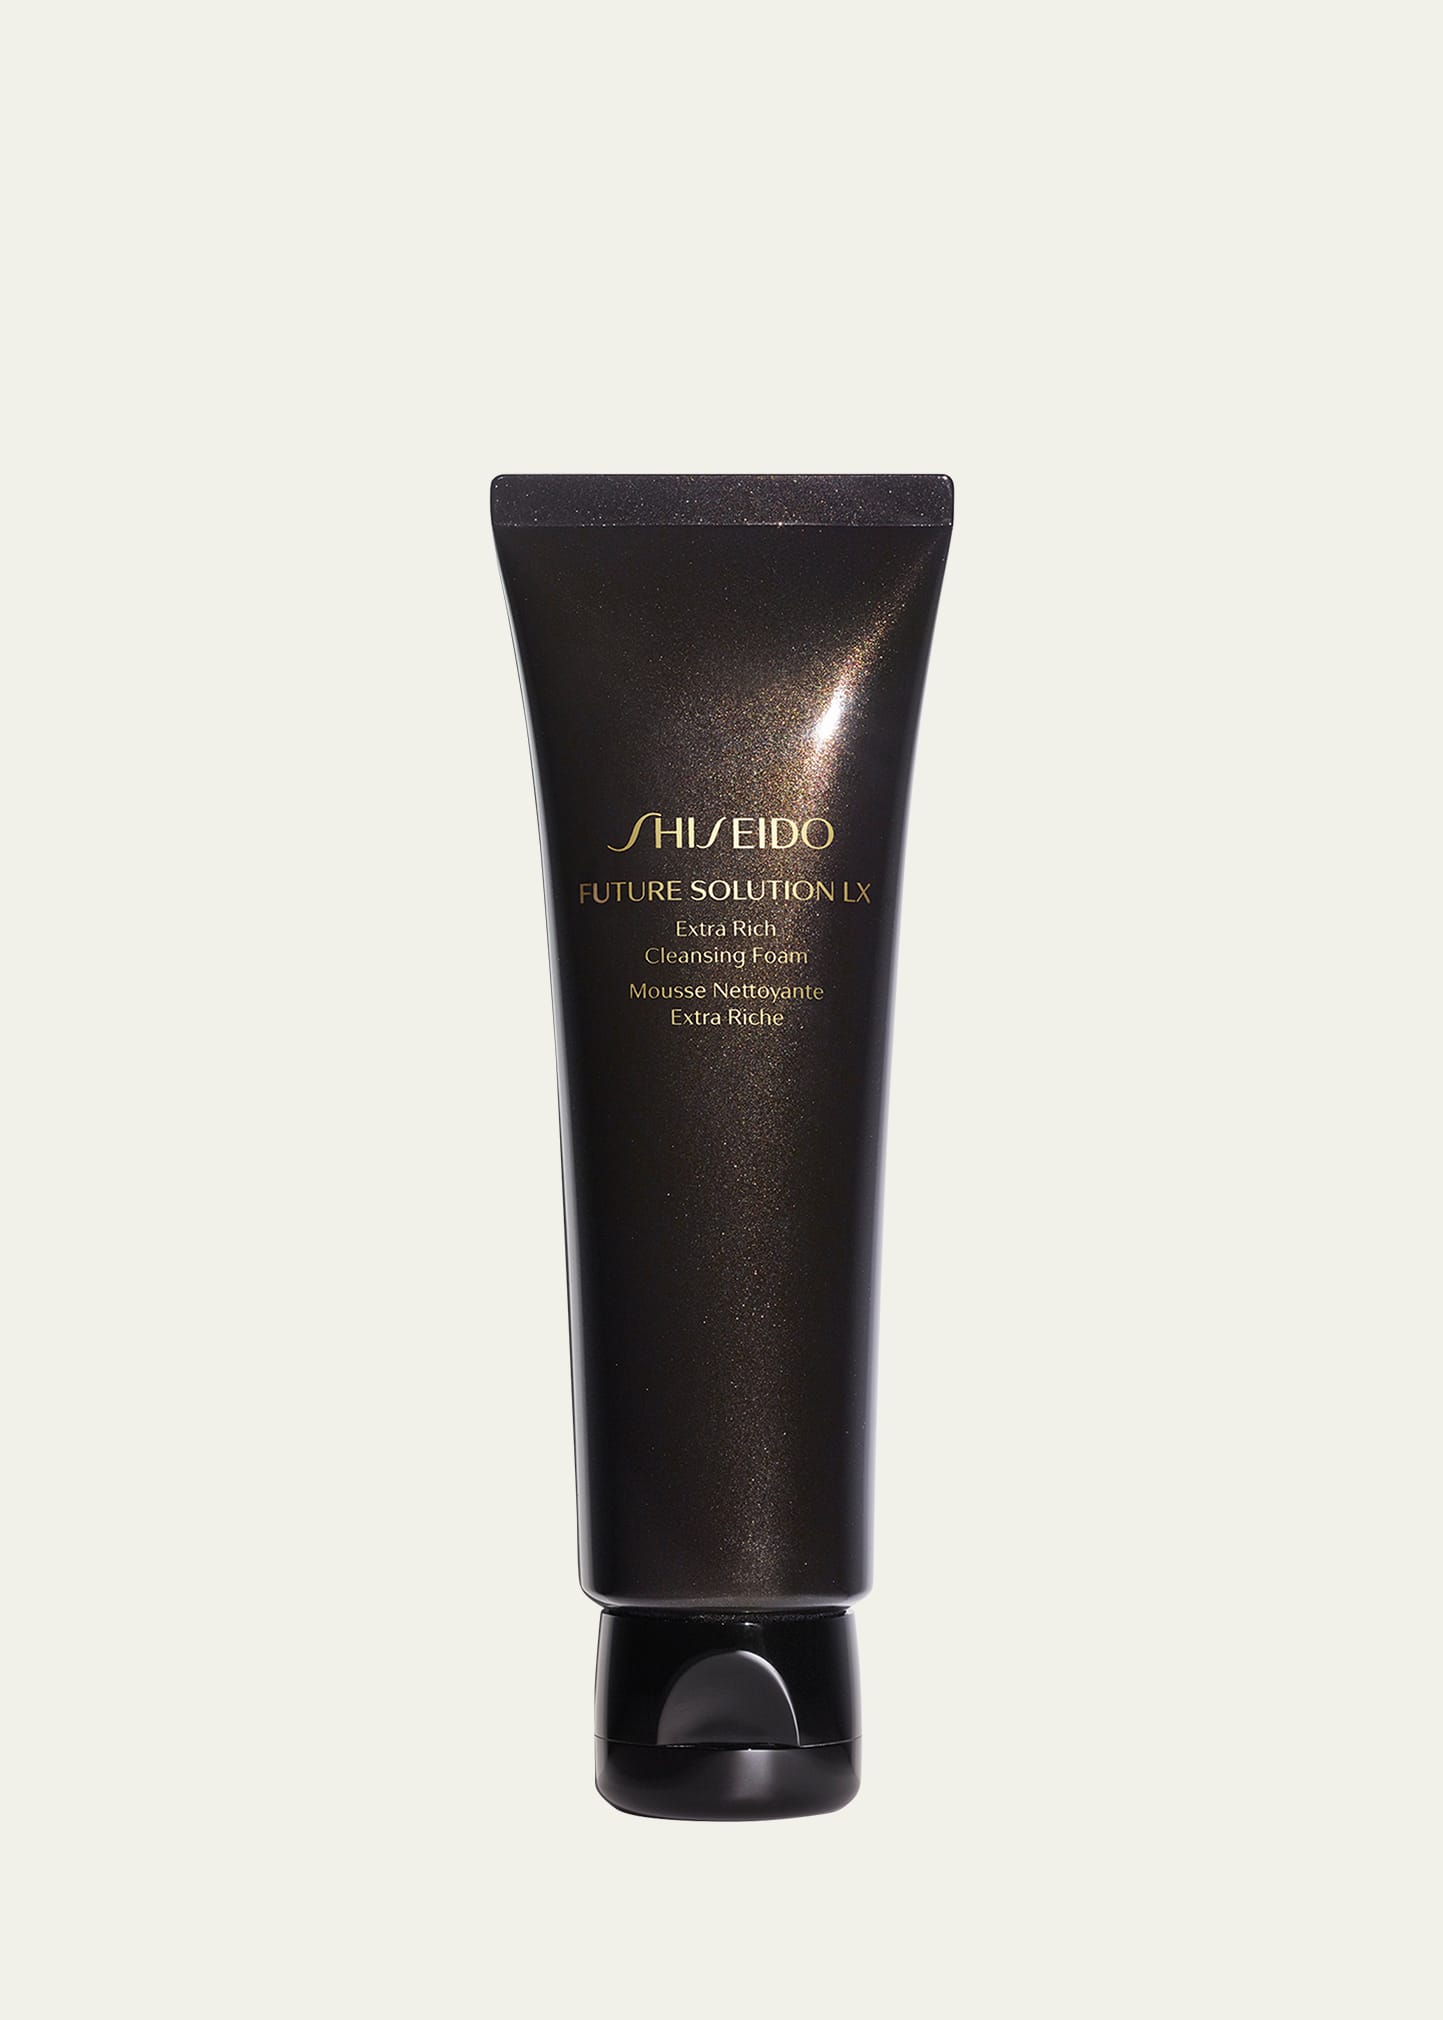 Future Solution LX Extra Rich Cleansing Foam, 4.7 oz.